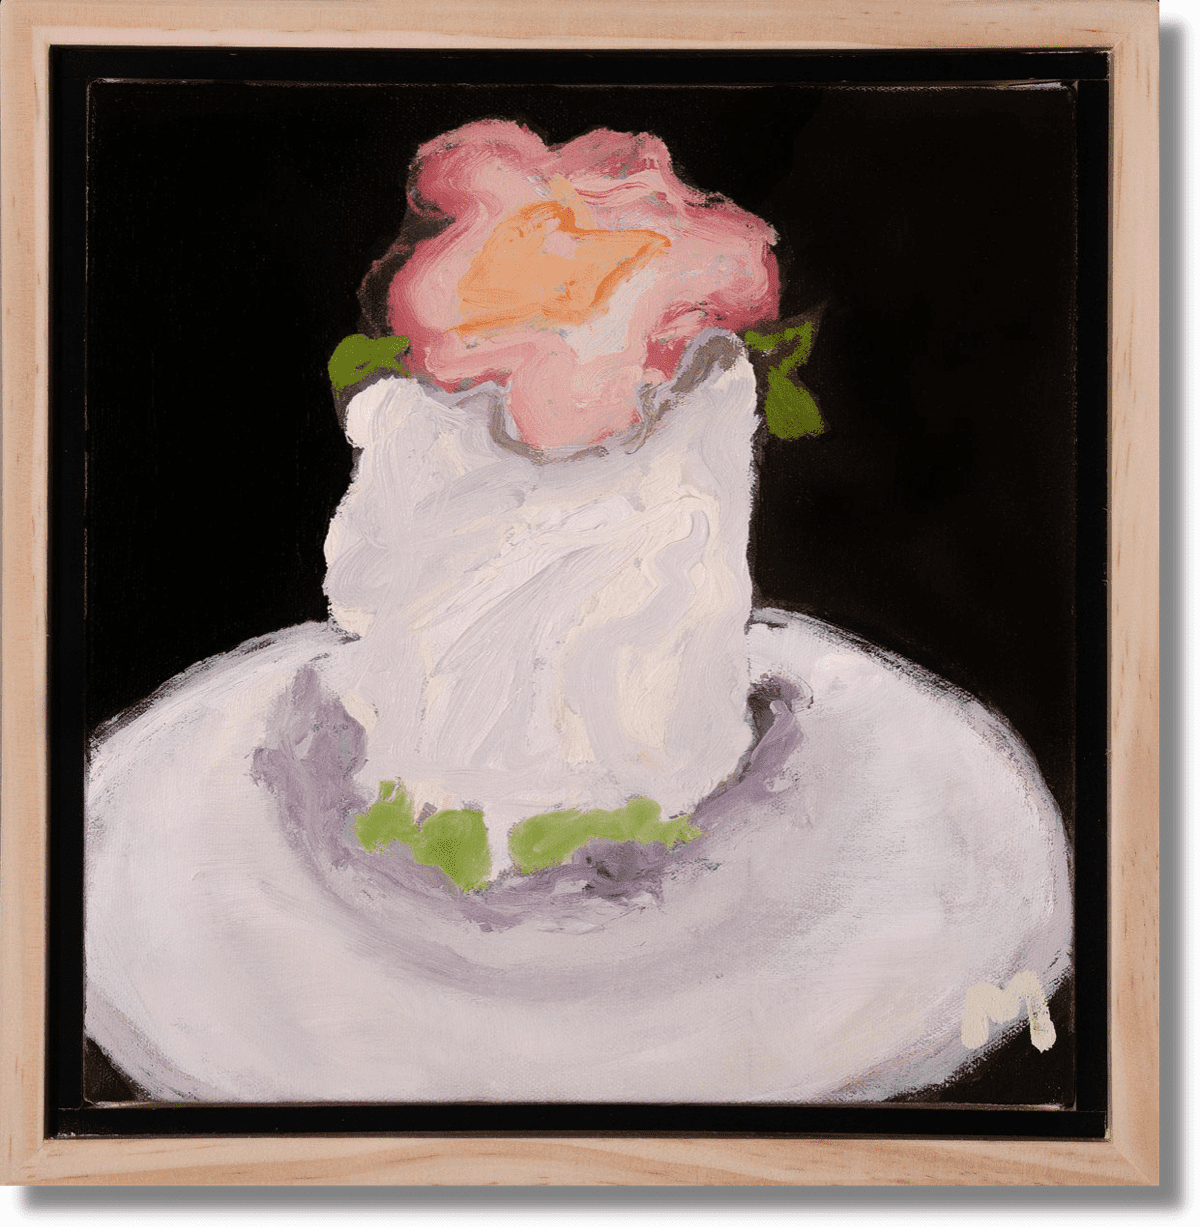 JUBILEE #3 | 10″ x 10″, oil on canvas, framed in a natural floating frame | $300